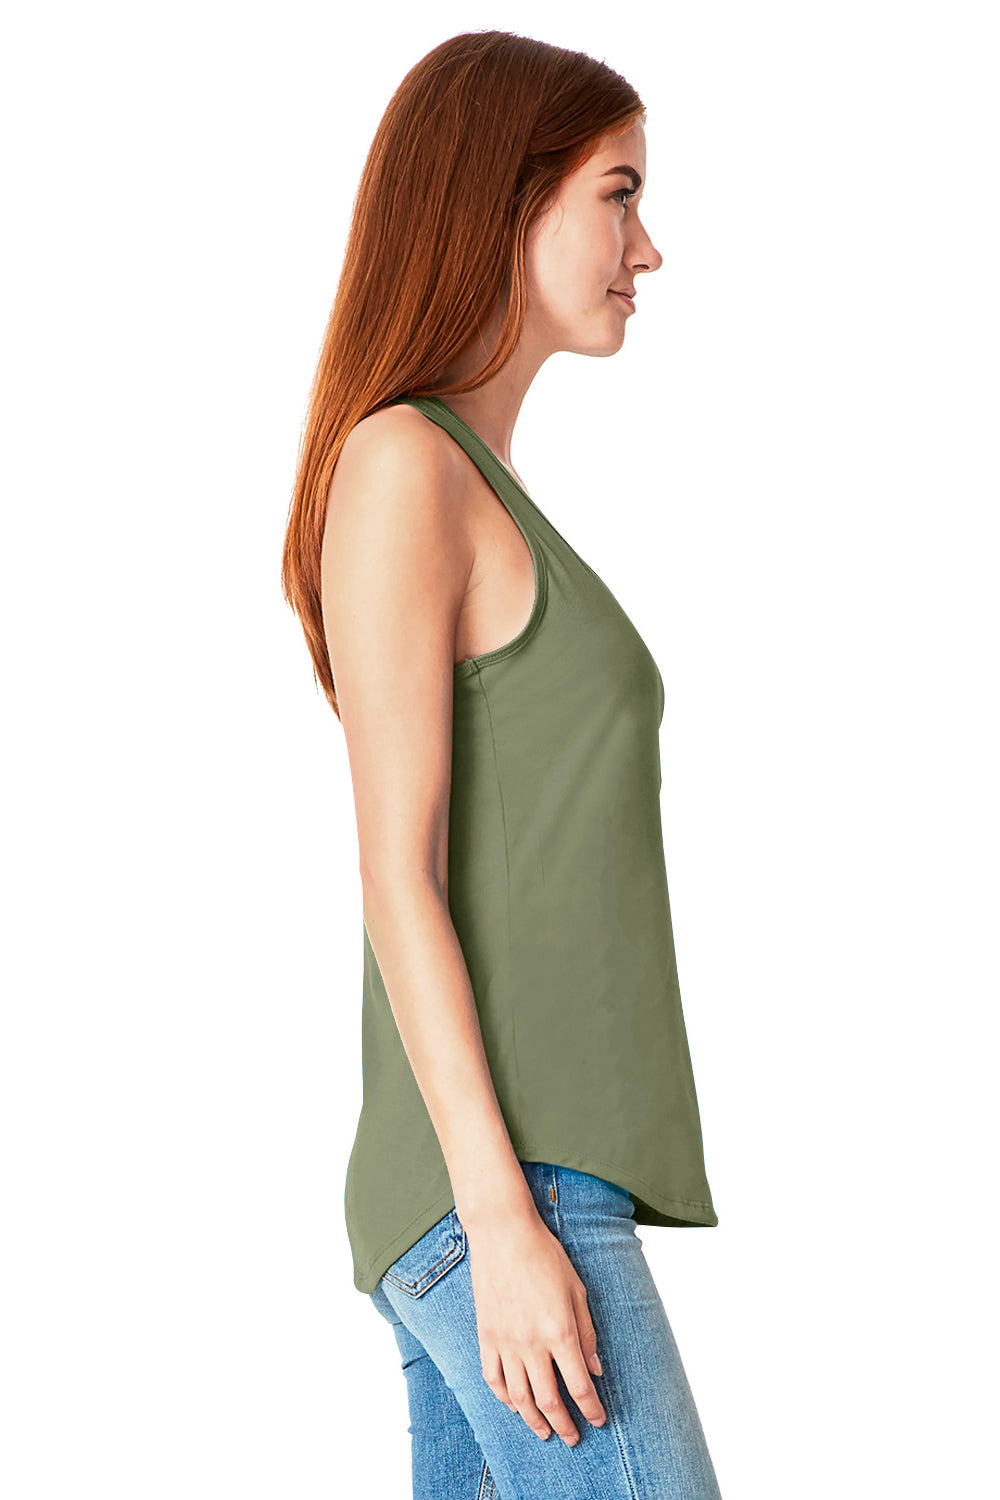 Next Level 6338 Womens Gathered Tank Top Military Green Side